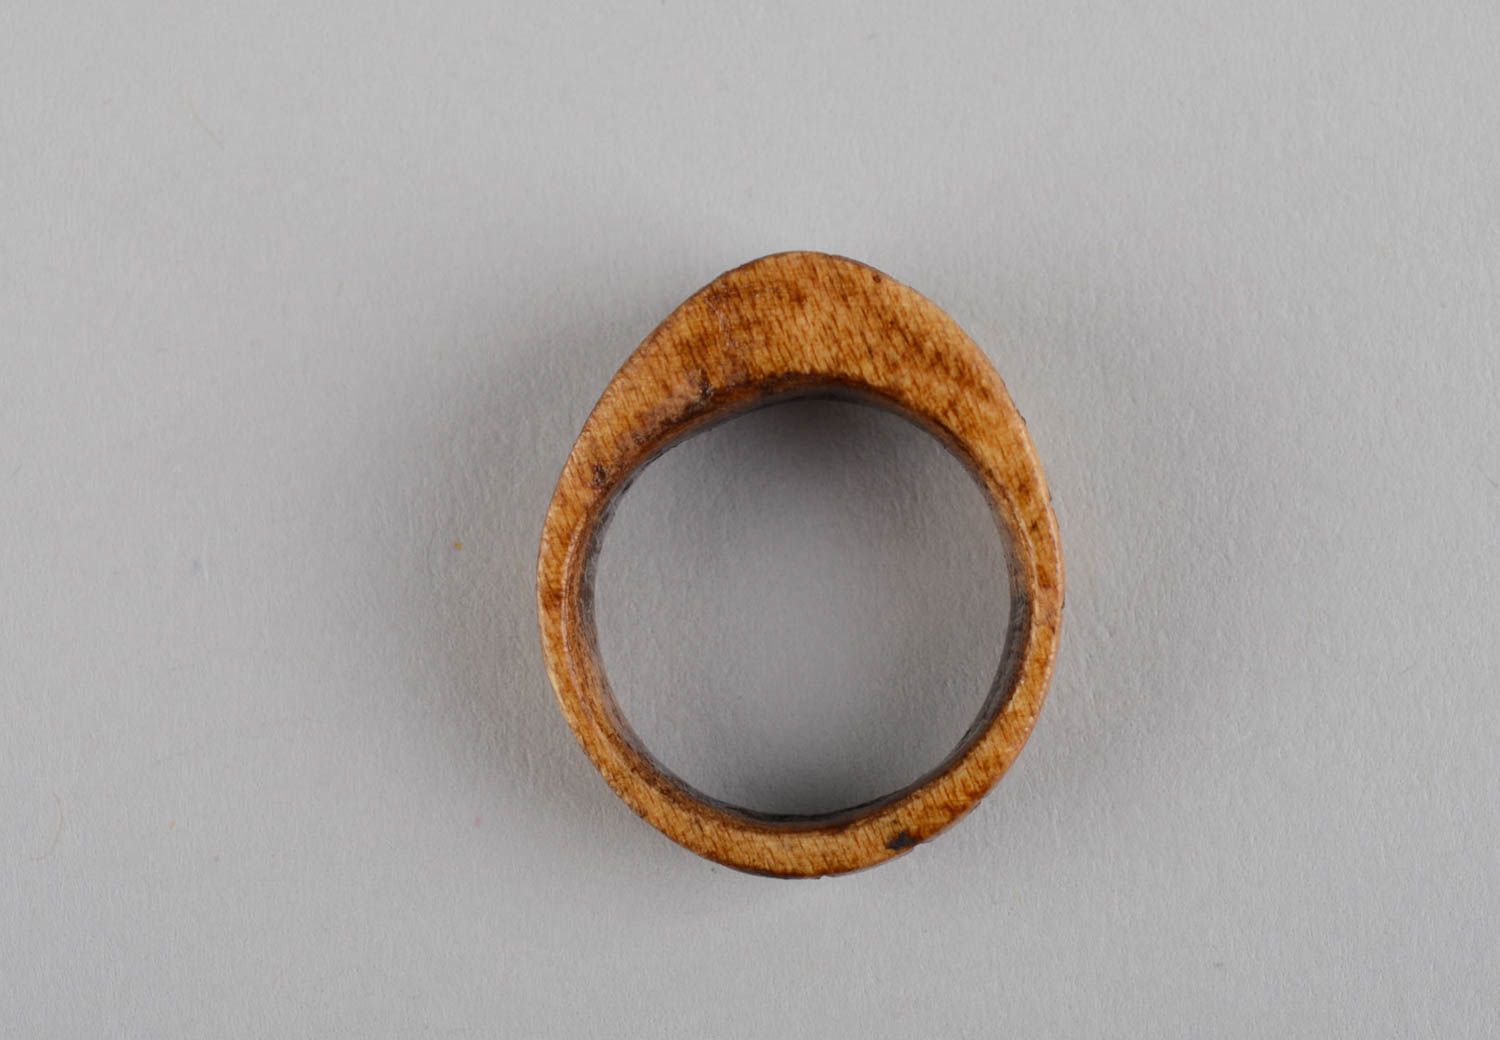 Unusual handmade wooden ring fashion accessories wood craft gifts for her photo 10